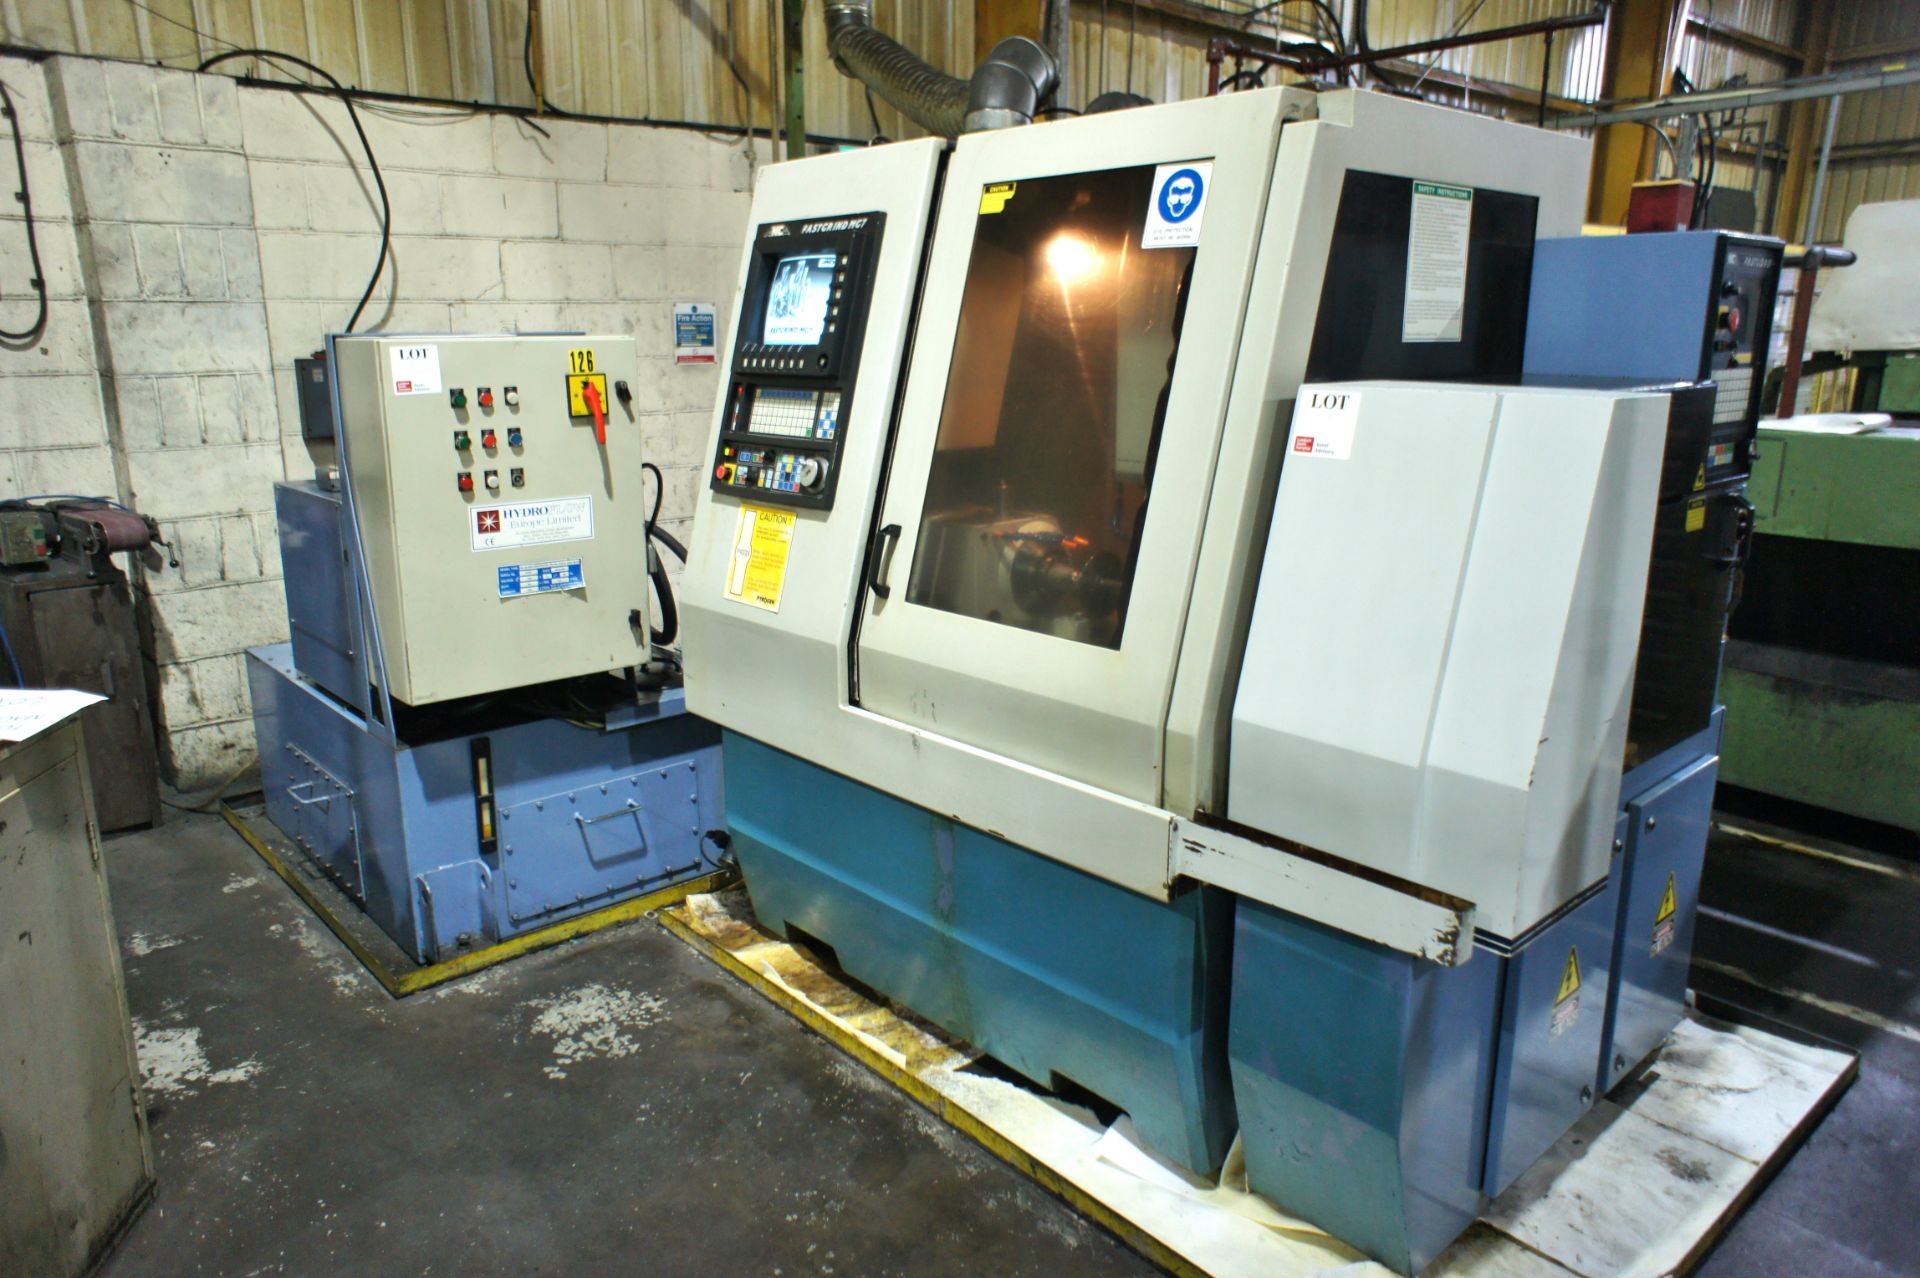 Anca Fast Grind SYS32 CNC M97 CNC tool grinder